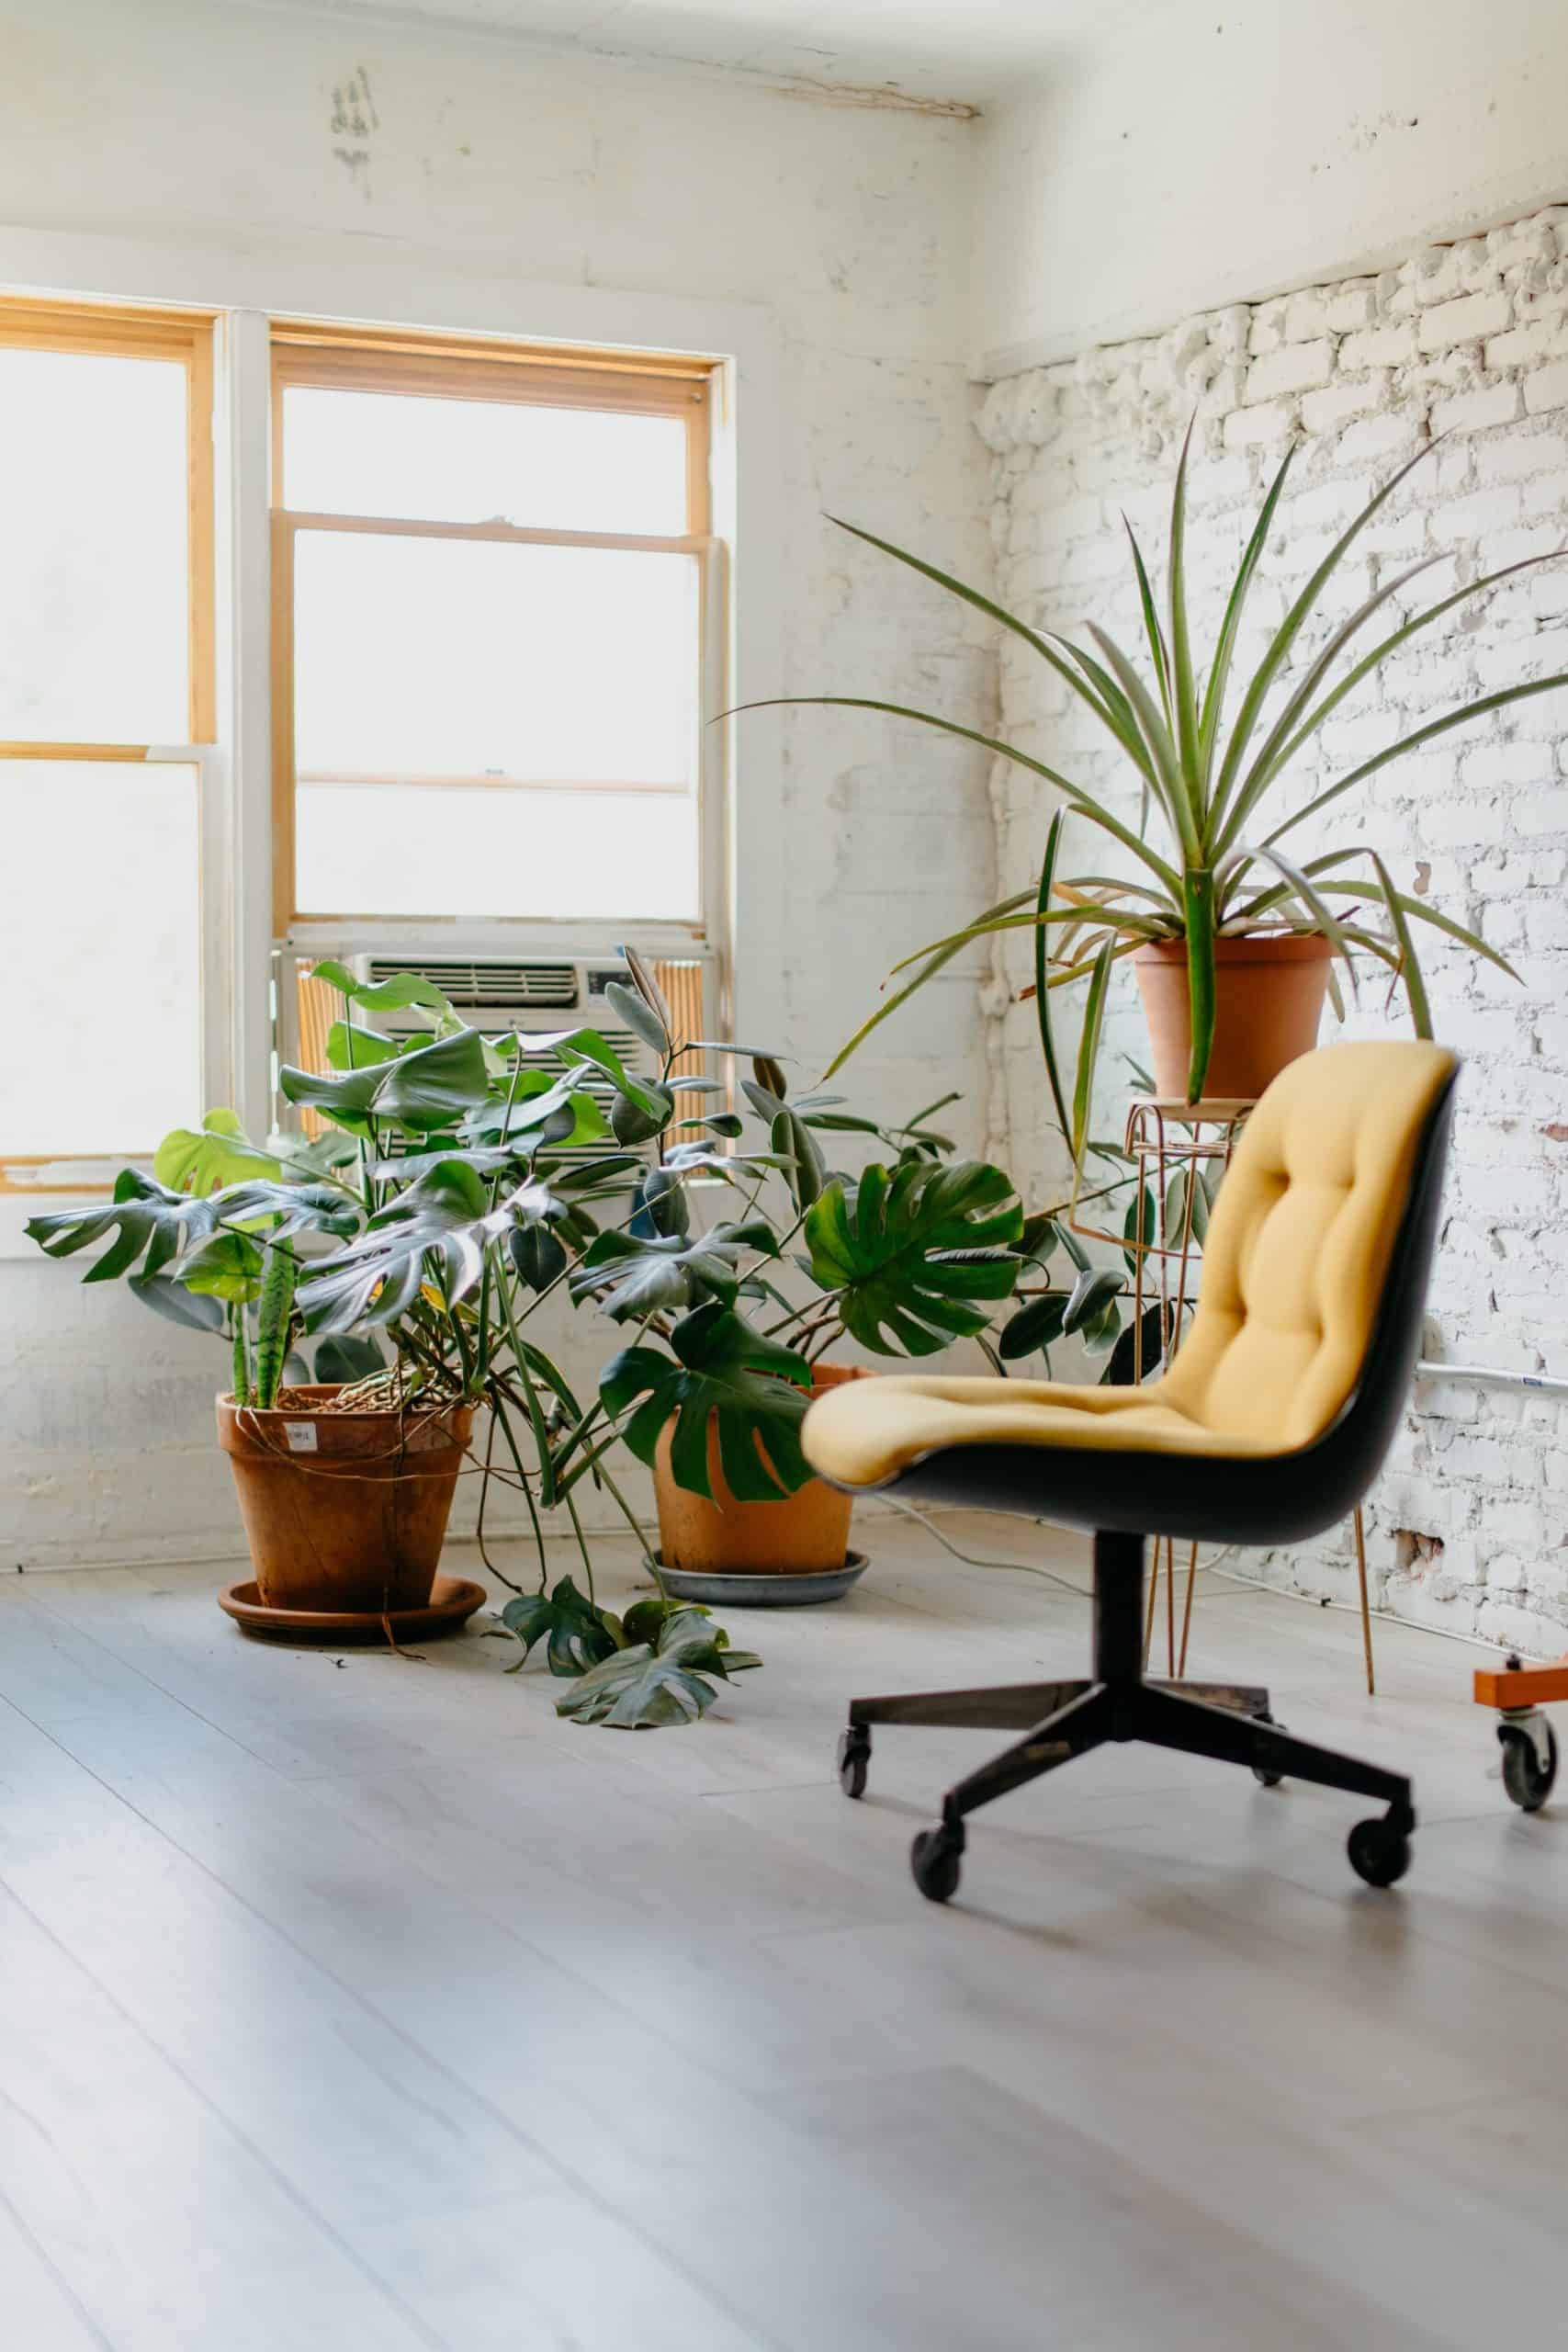 Inside a home office with a yellow chair